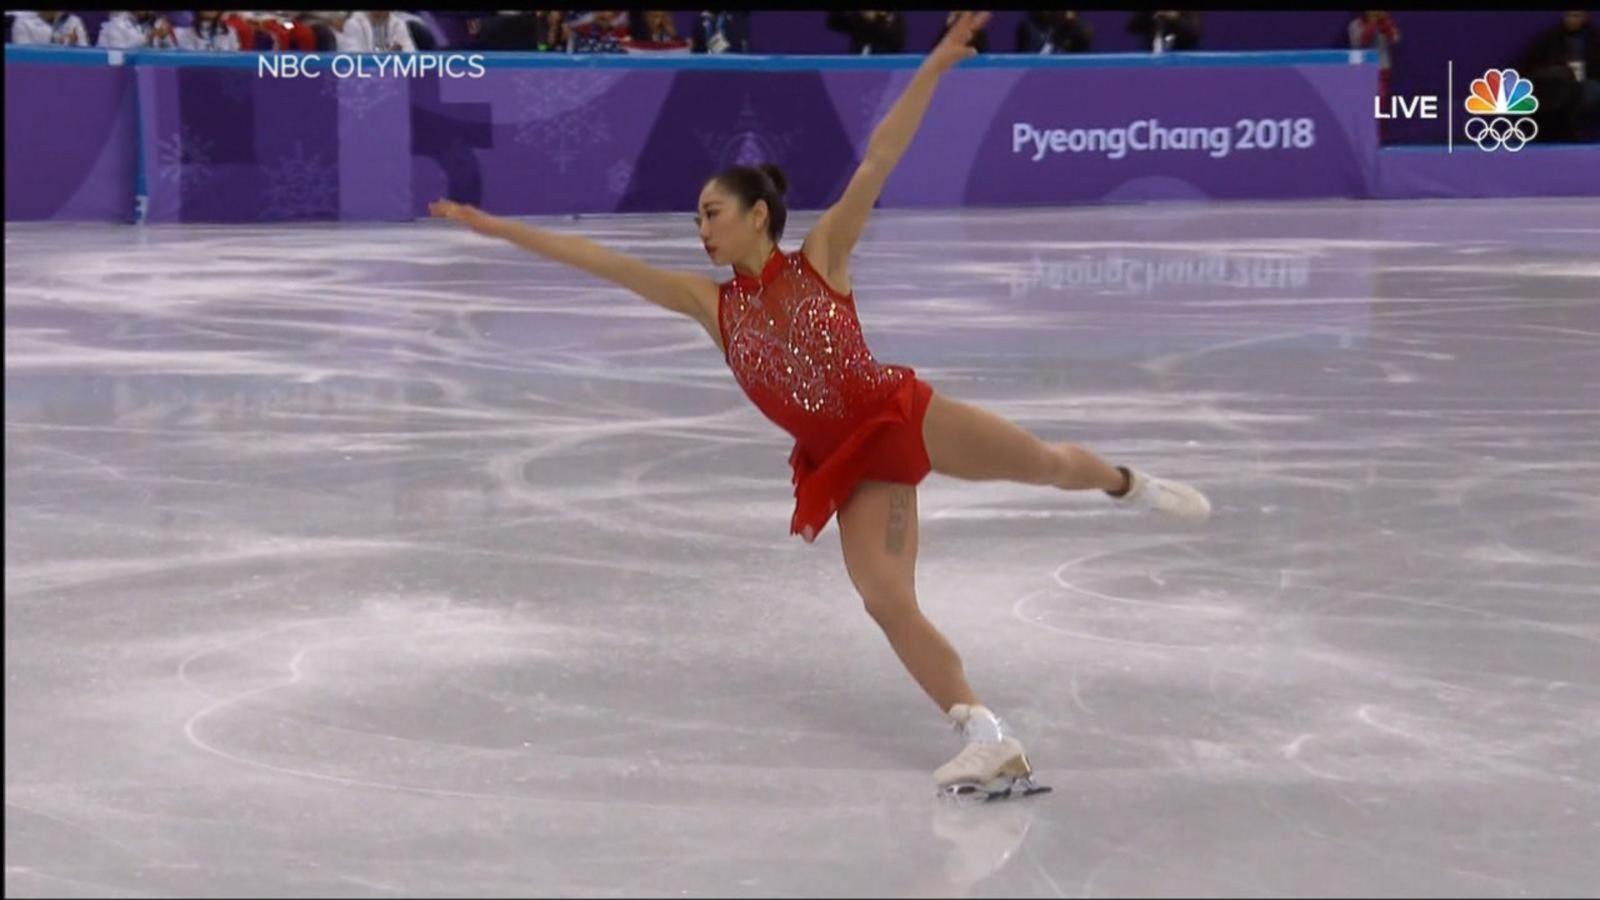 US female figure skater 1 of only 3 in Olympic history to